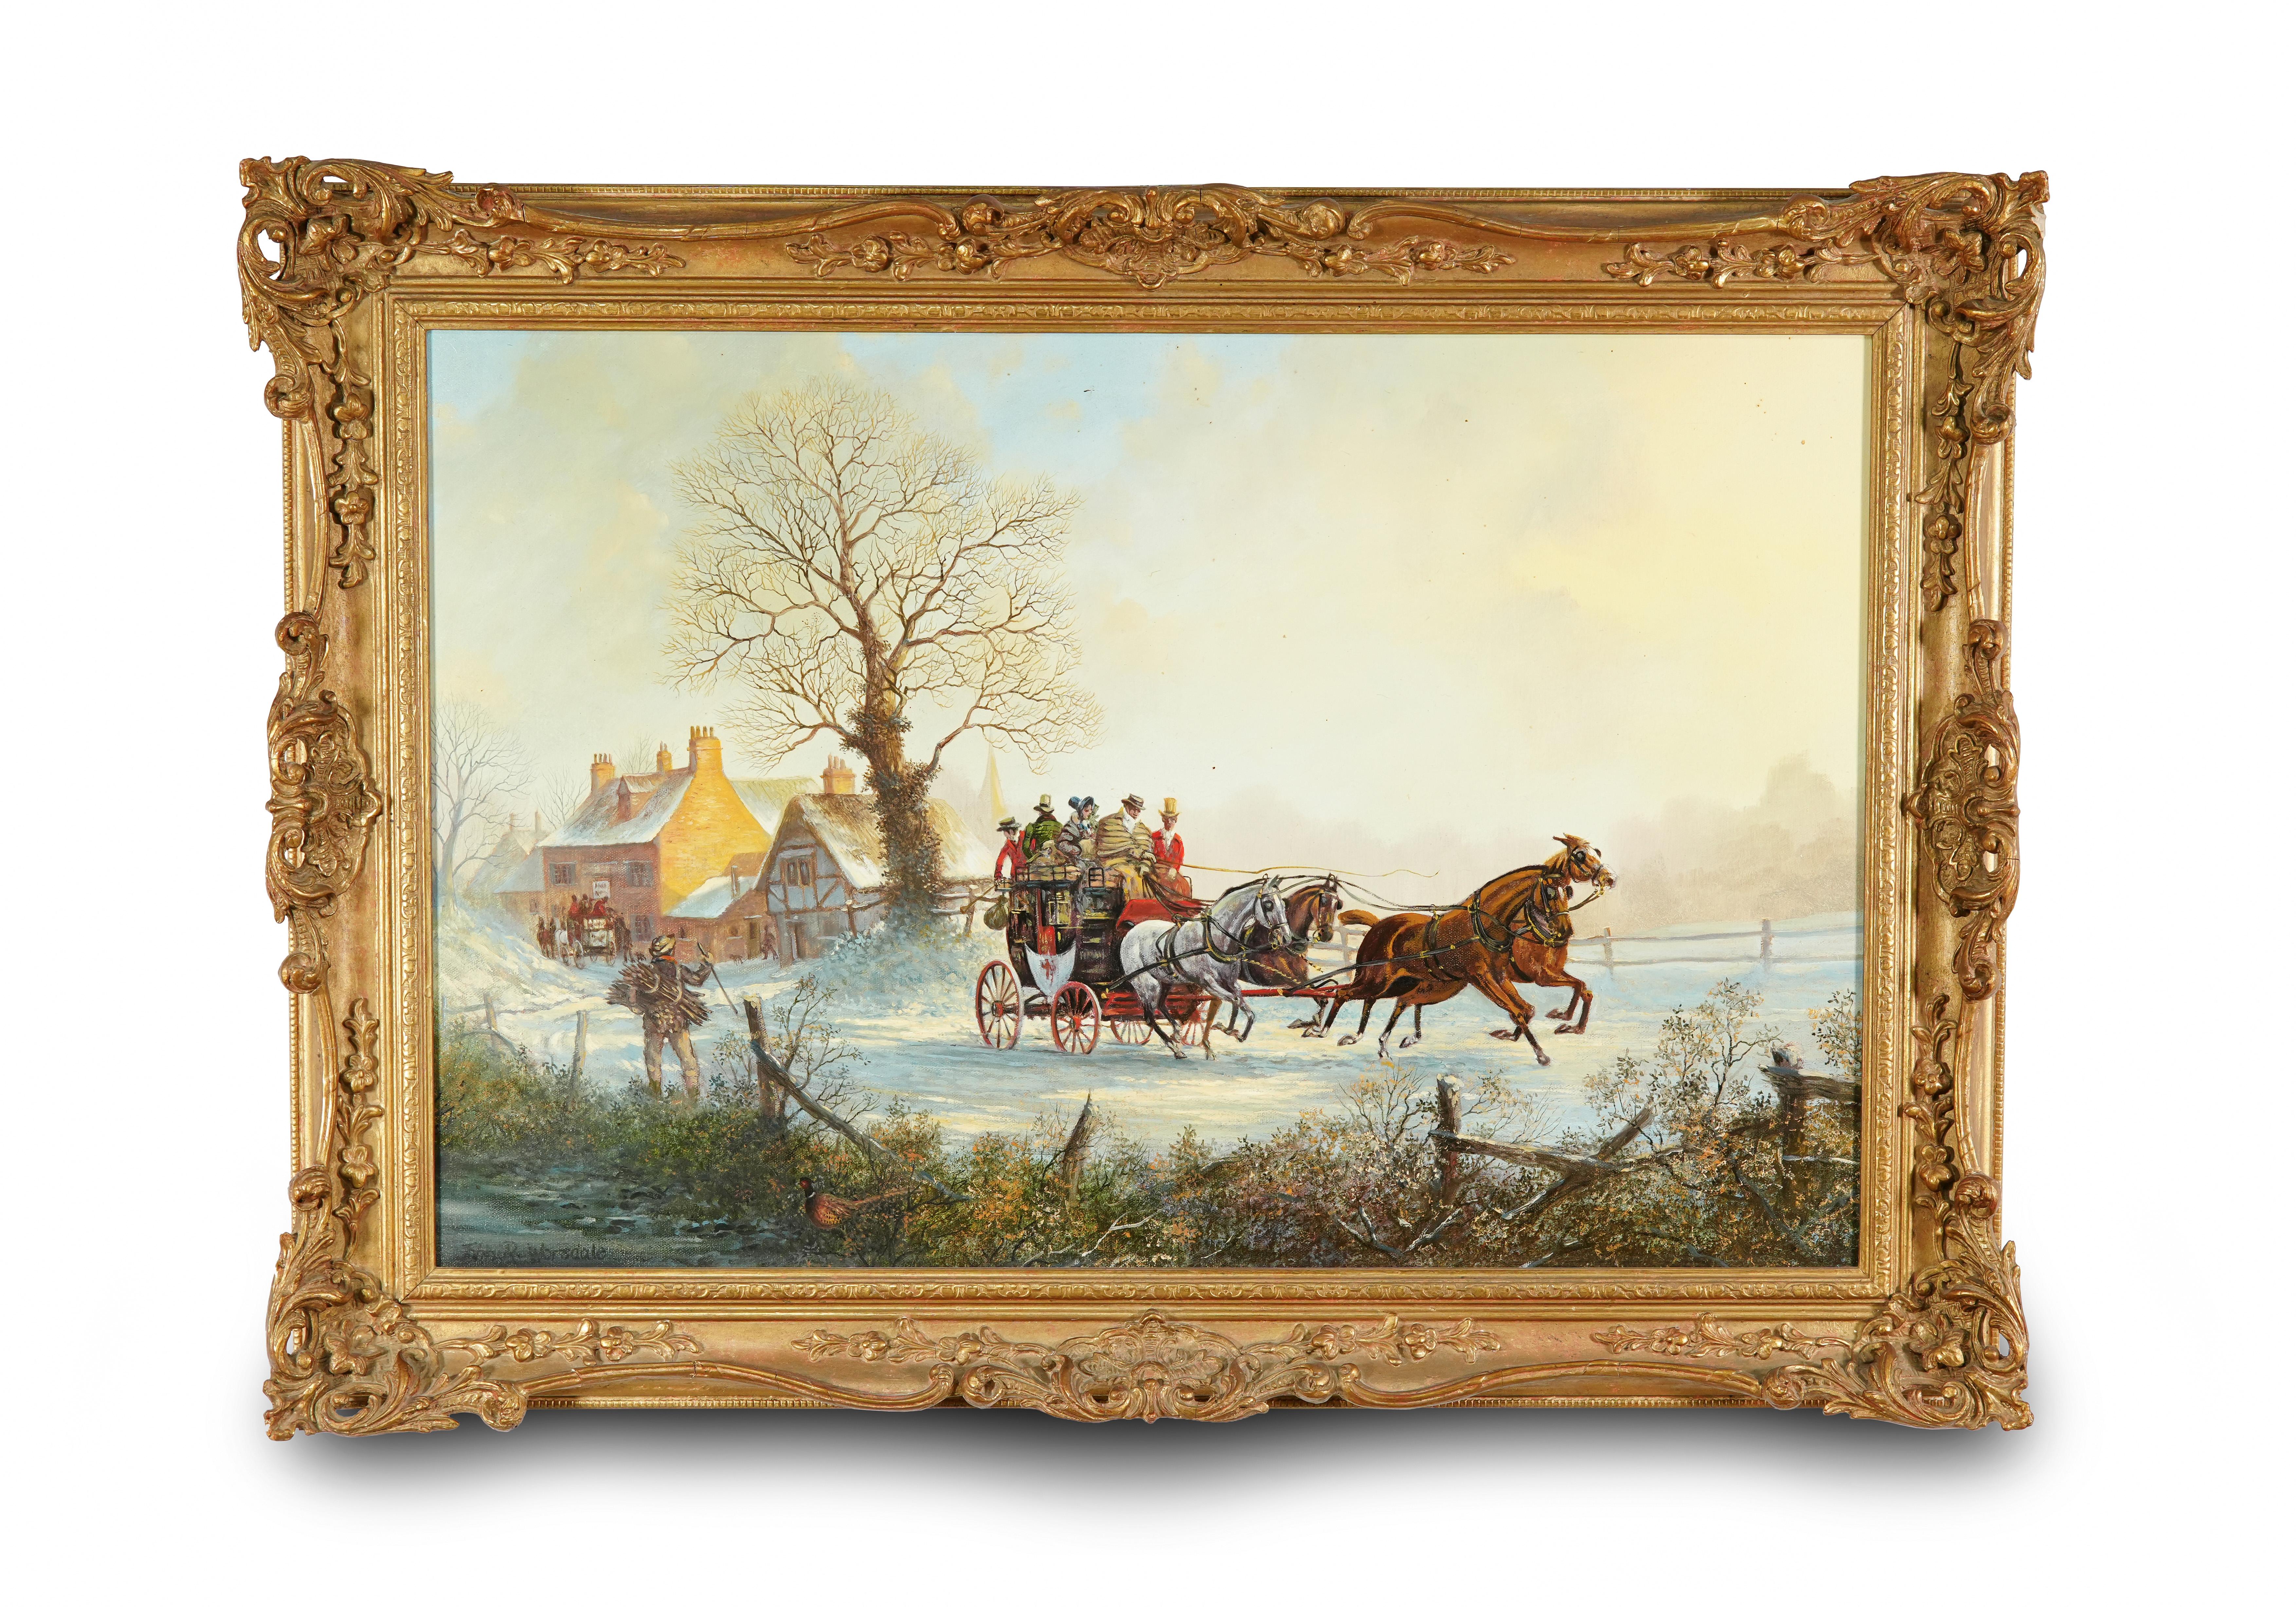 A fine antique oil painting of horses pulling a stagecoach in snow , by John richard Worsdale (1869-1947)
The artist portrays this powerful scene with an extensive view, featuring the stagecoach pulled by 4 horses 
and a village scene behind with